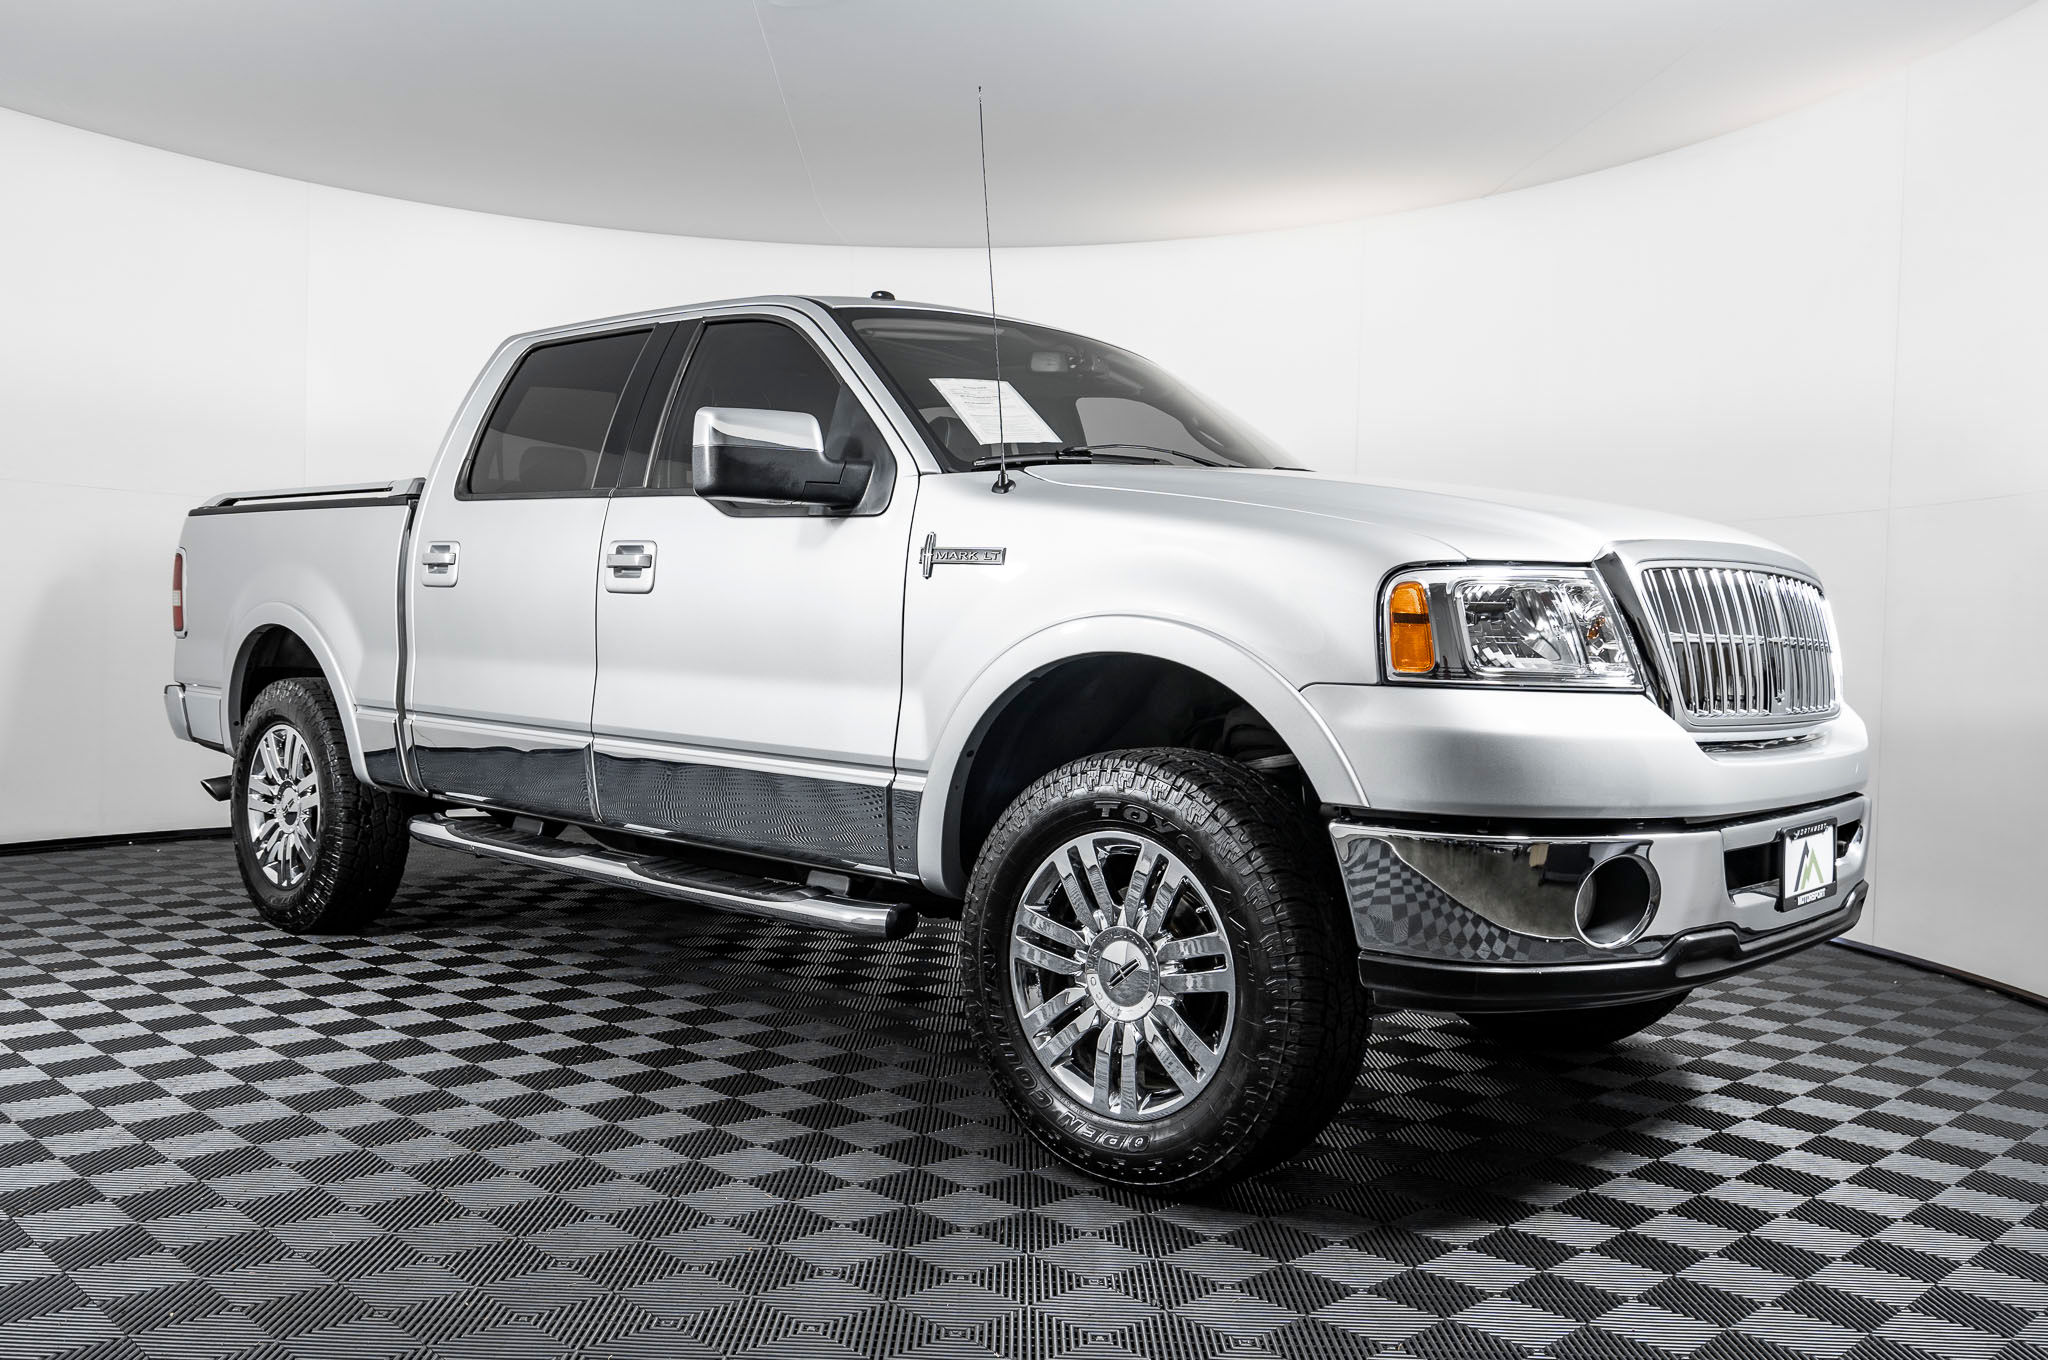 Used Lifted 2007 Lincoln Mark LT 4x4 Truck For Sale - Northwest Motorsport